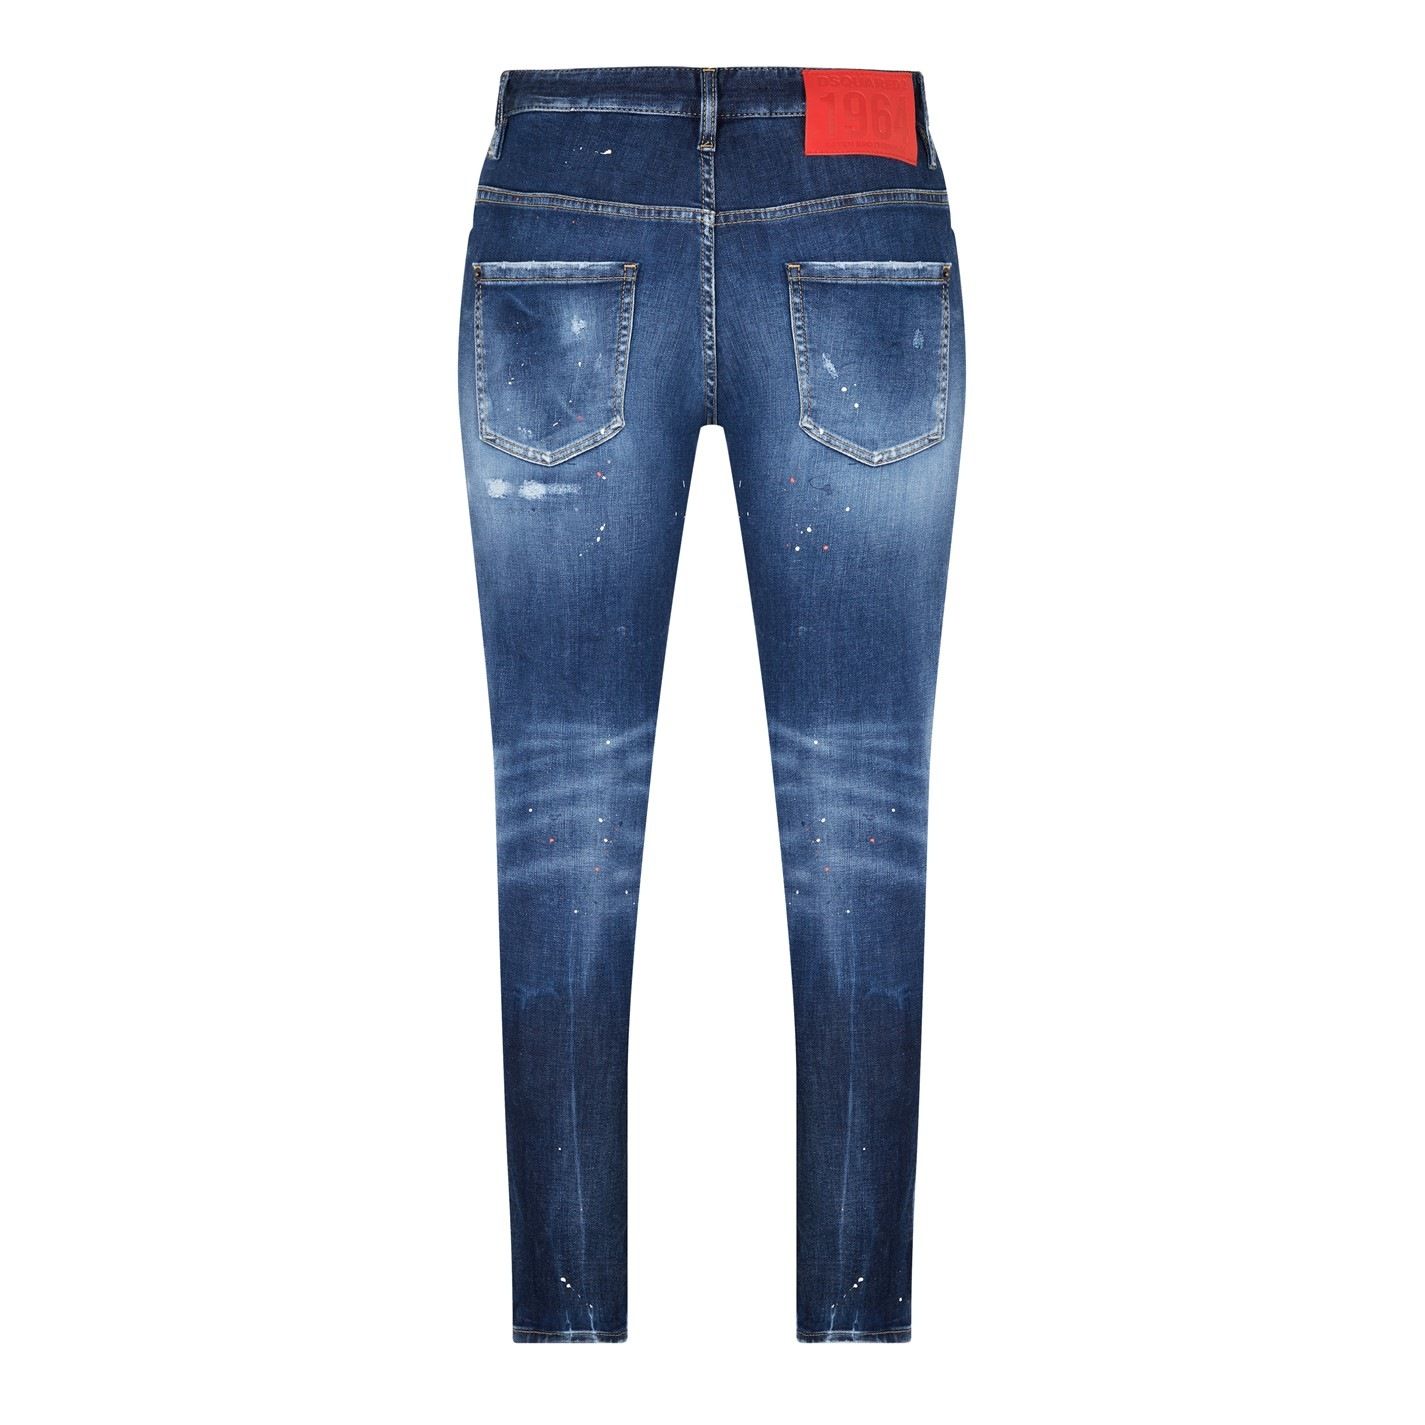 DSquared2 Distressed Super Twinky Jeans in Blue